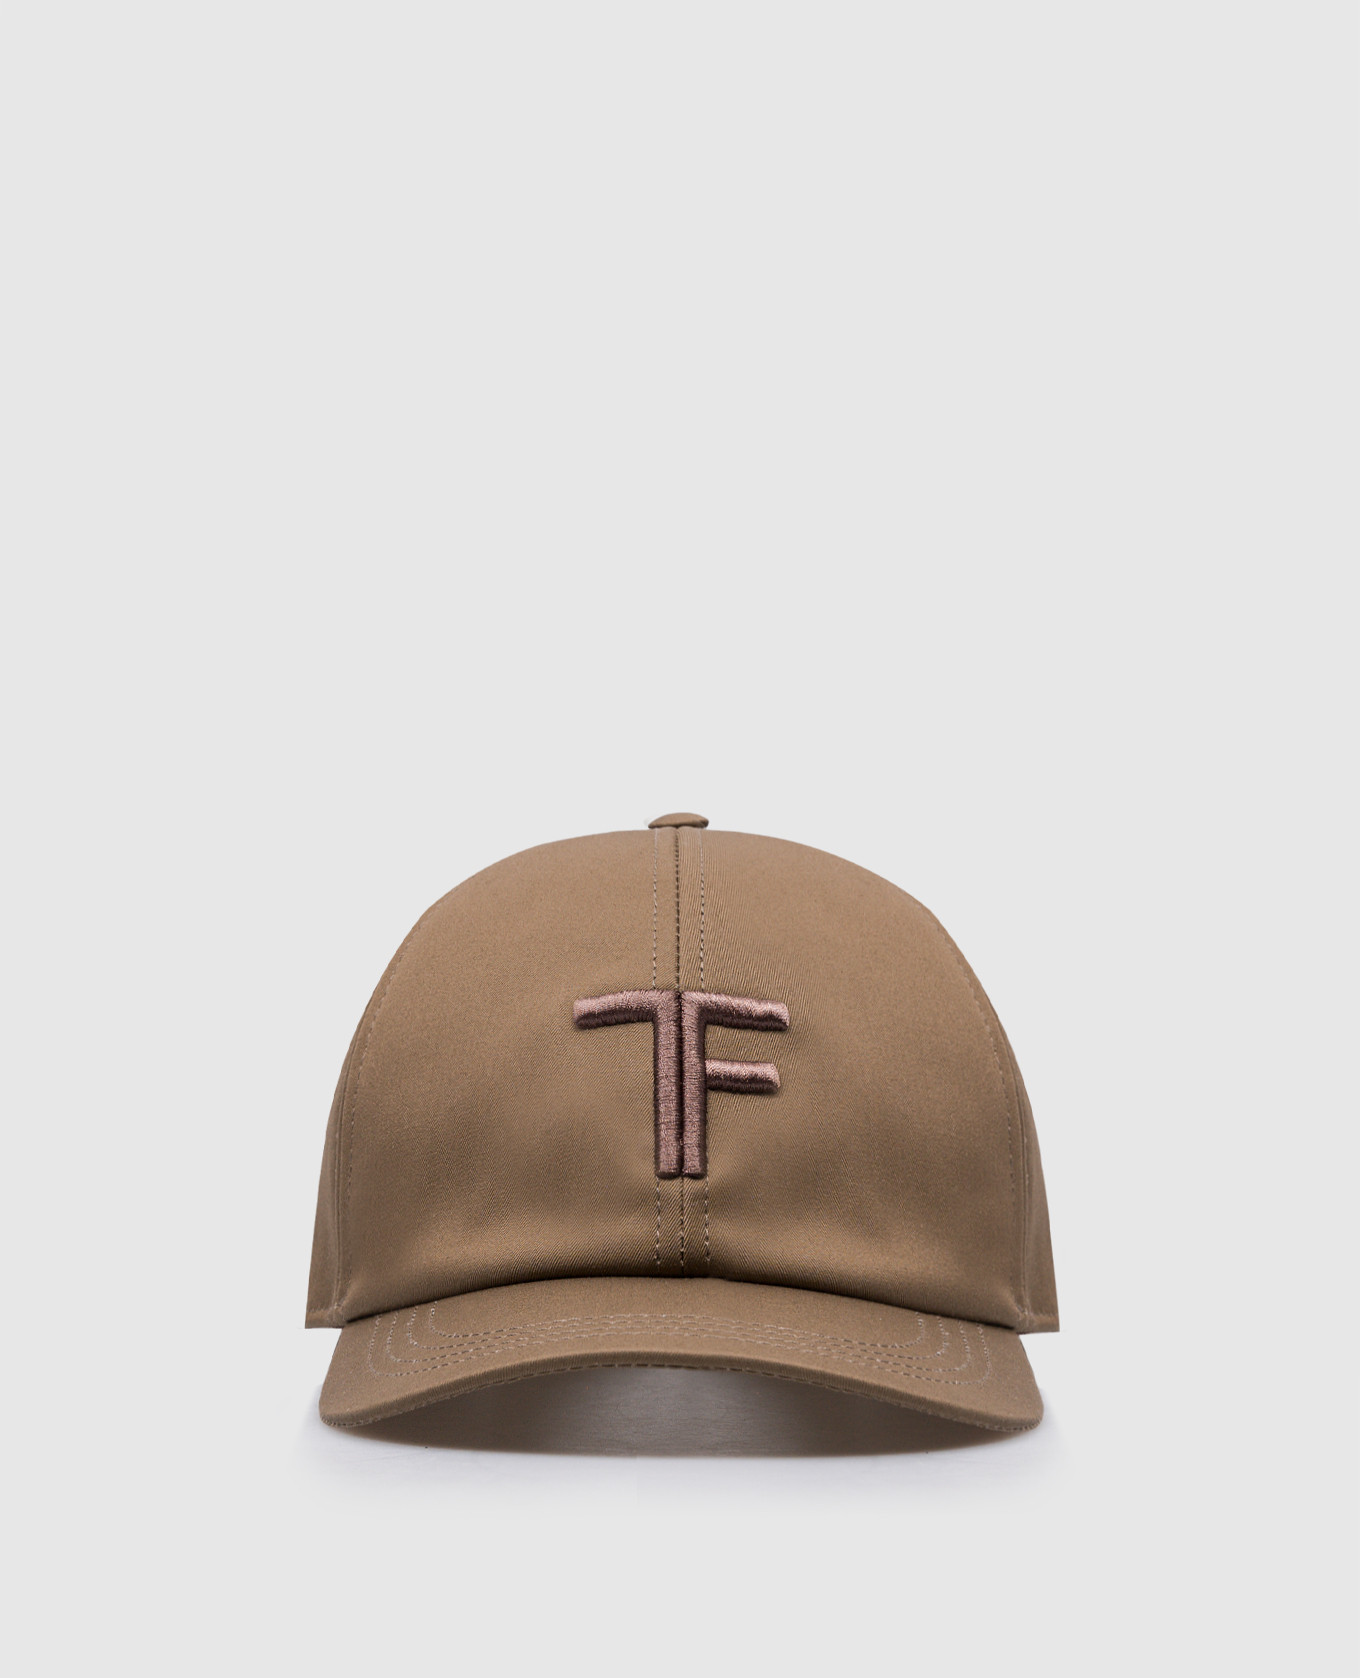 Brown cap with textured logo